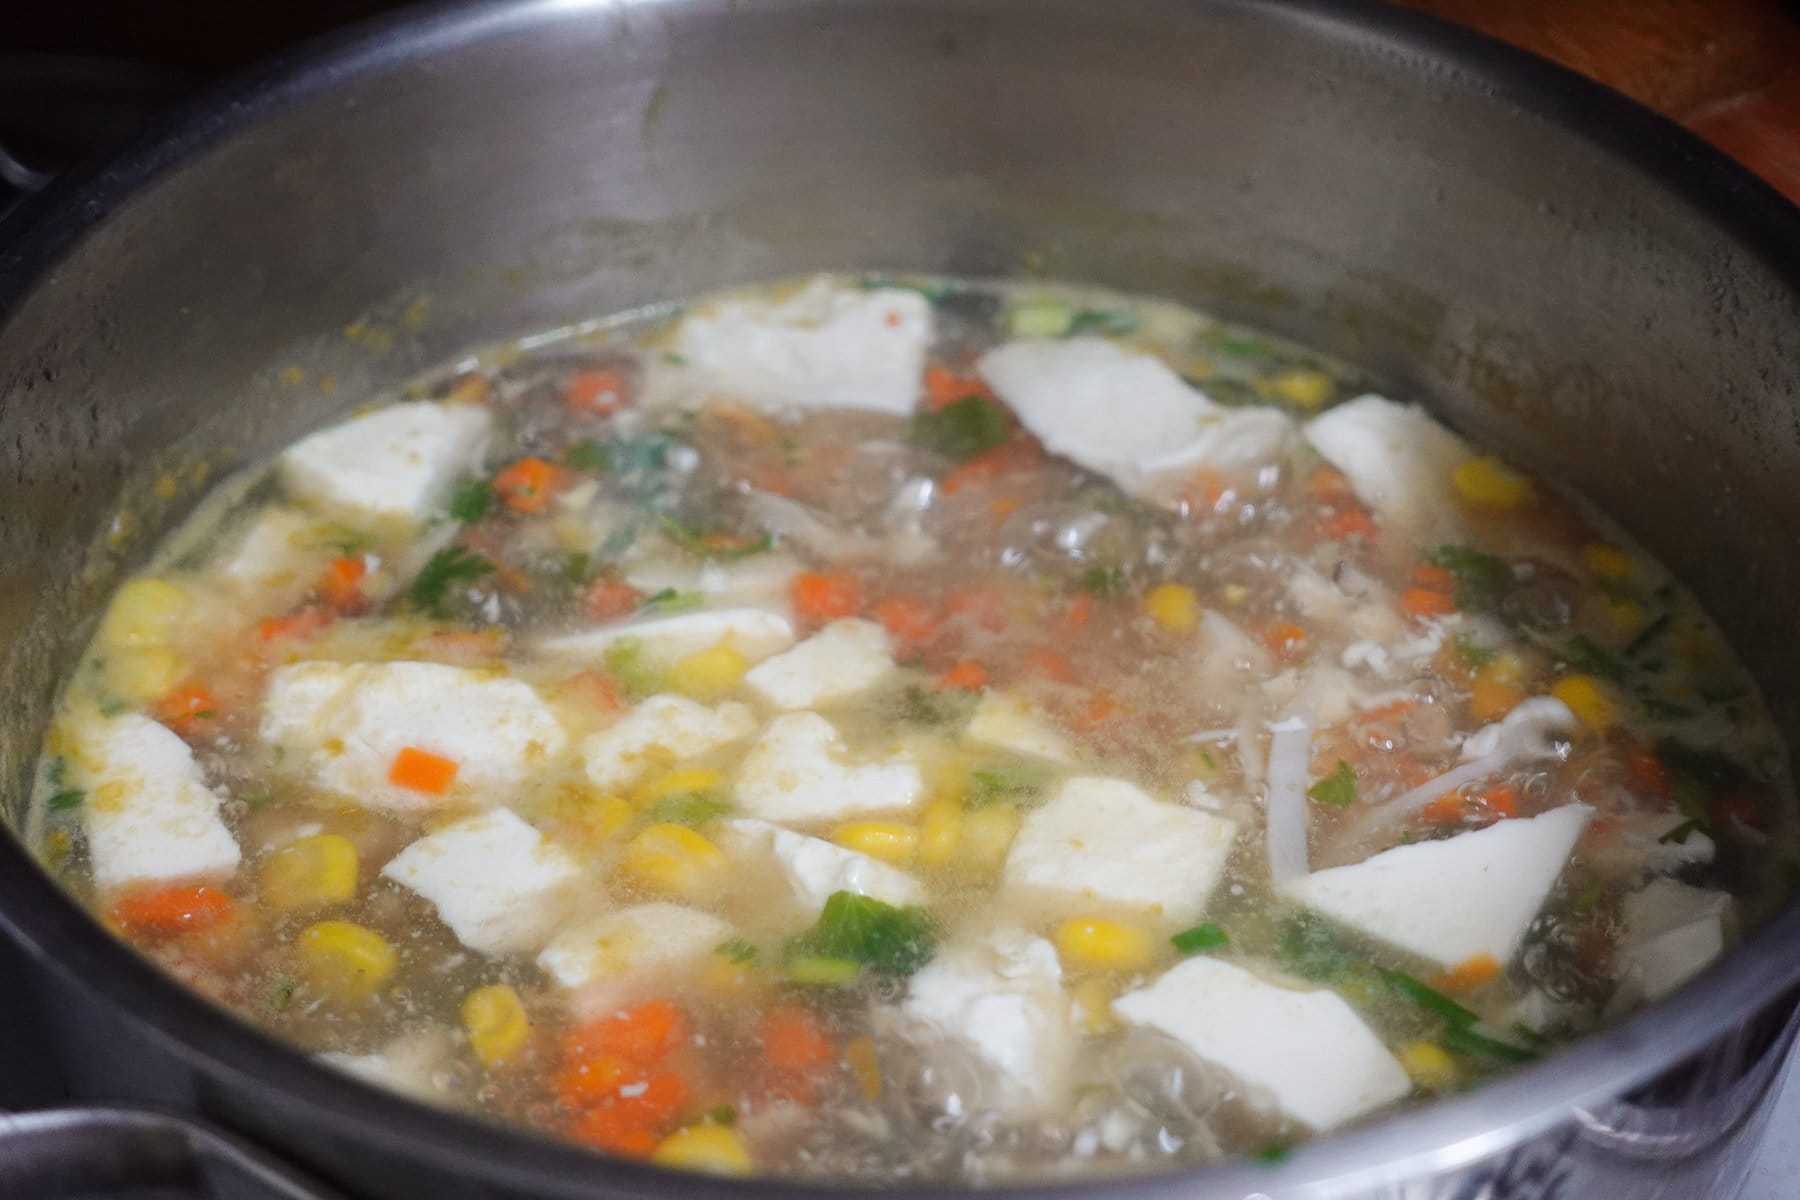 Simmer the broth with seasoning